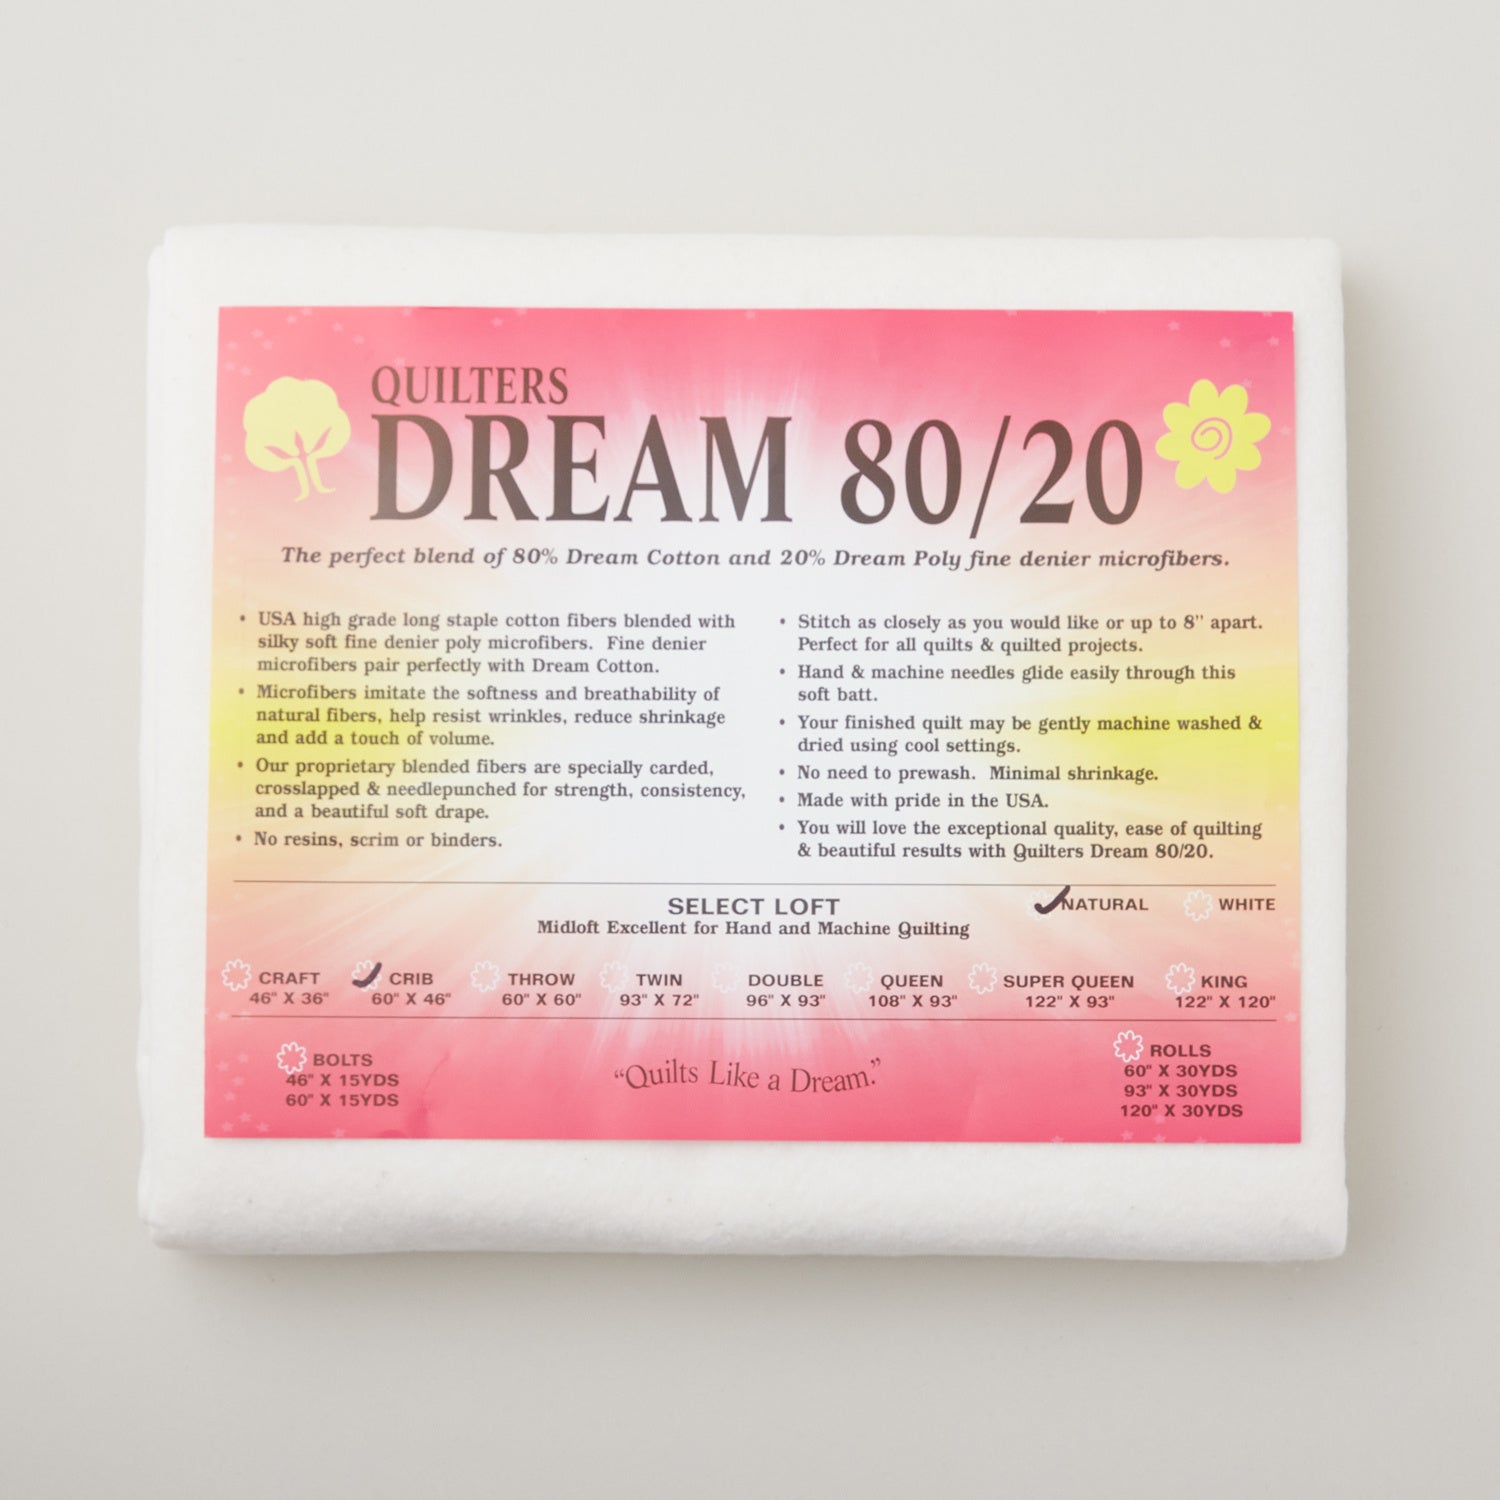 Quilters Dream Cotton Natural 80/20 Crib 46'' x 60